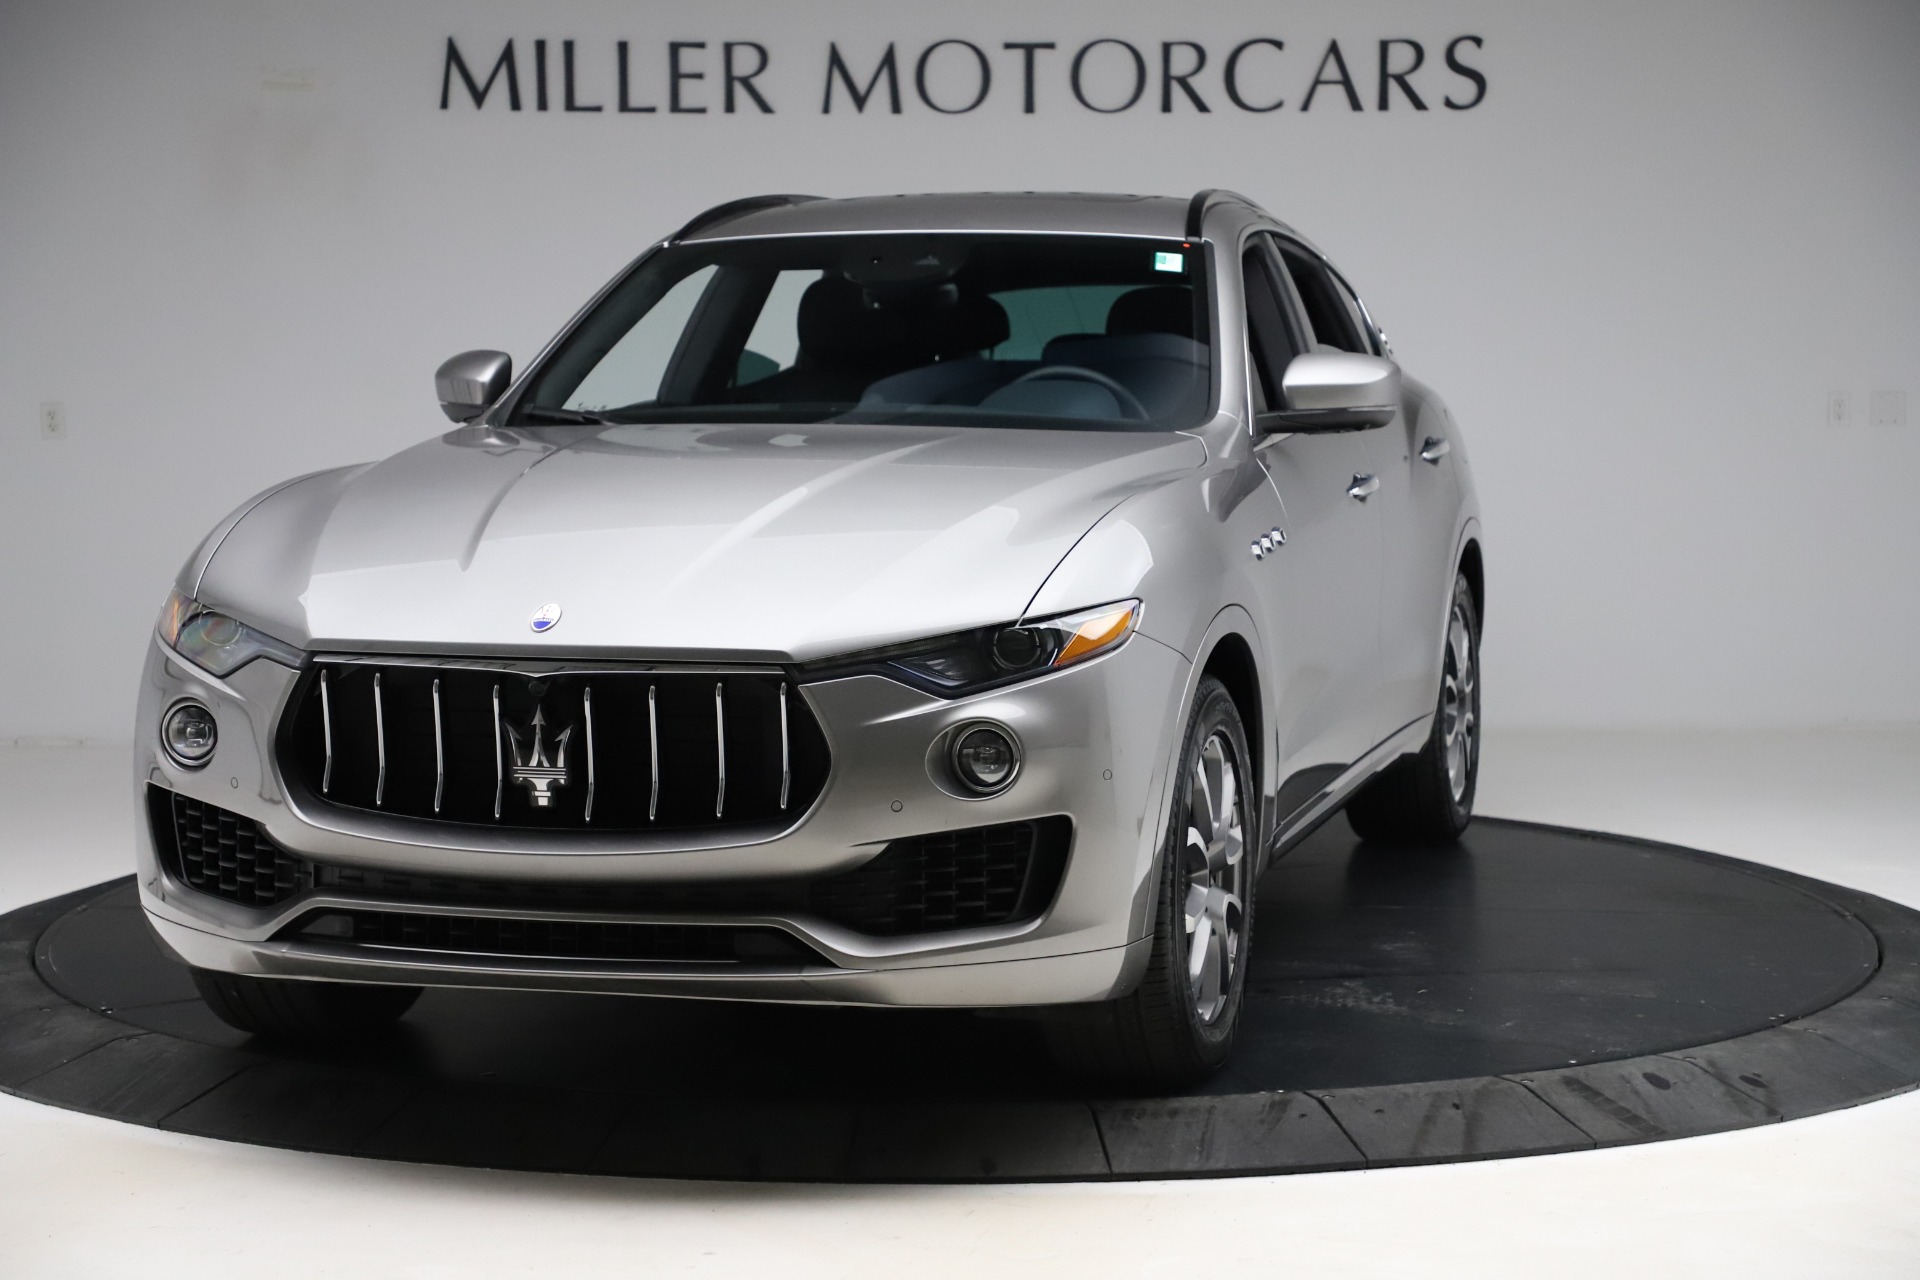 New 2019 Maserati Levante Q4 for sale Sold at Rolls-Royce Motor Cars Greenwich in Greenwich CT 06830 1